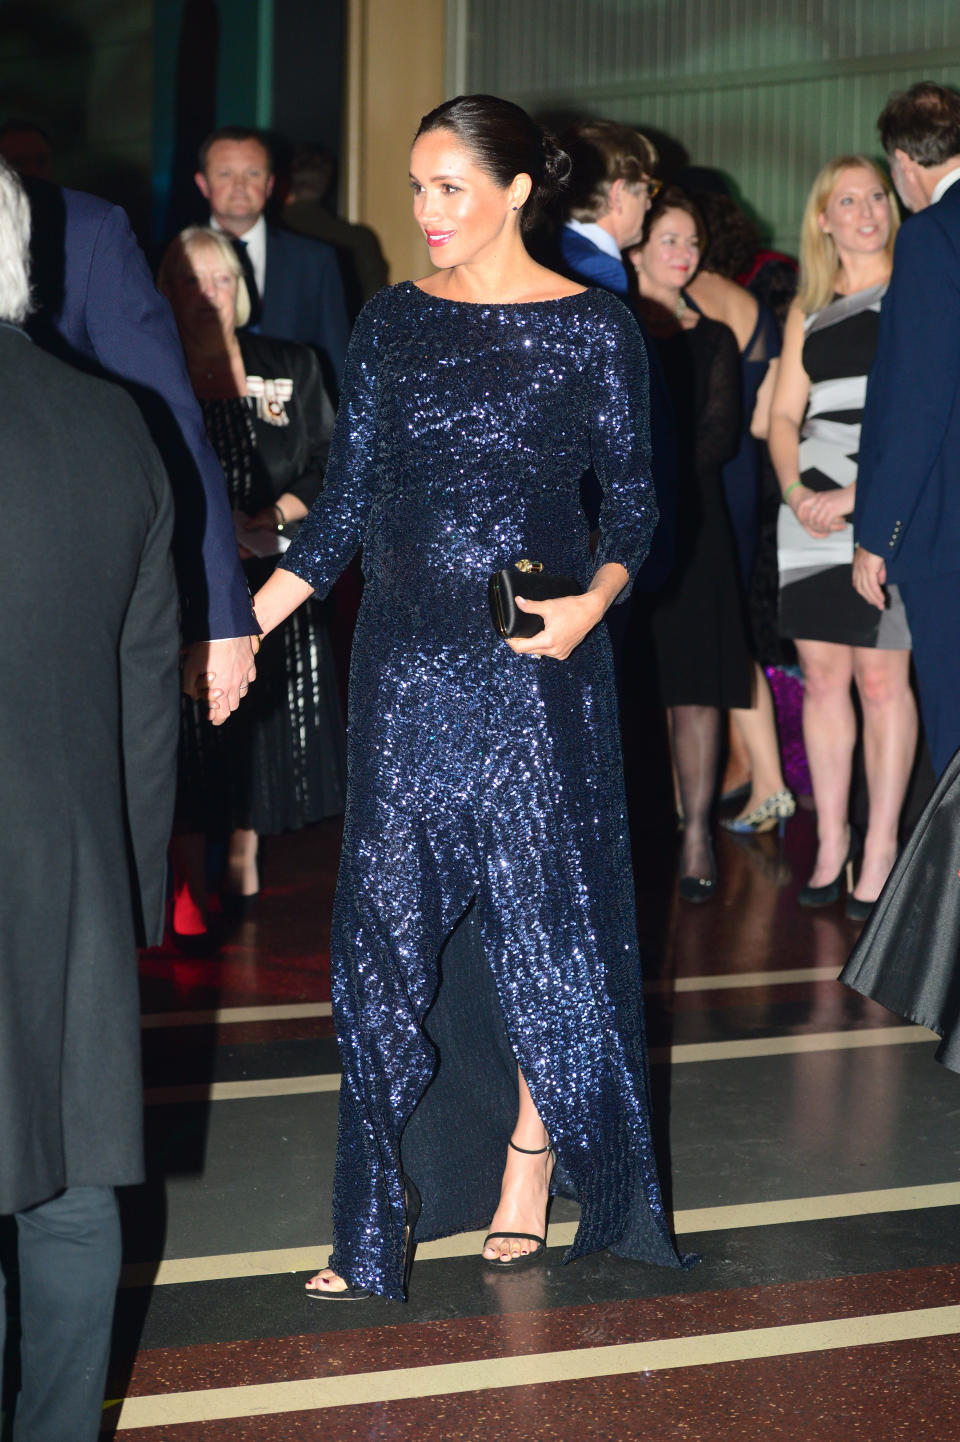 Meghan Markle at the premiere of Cirque Du Soleil's Totum on 16 January 2019